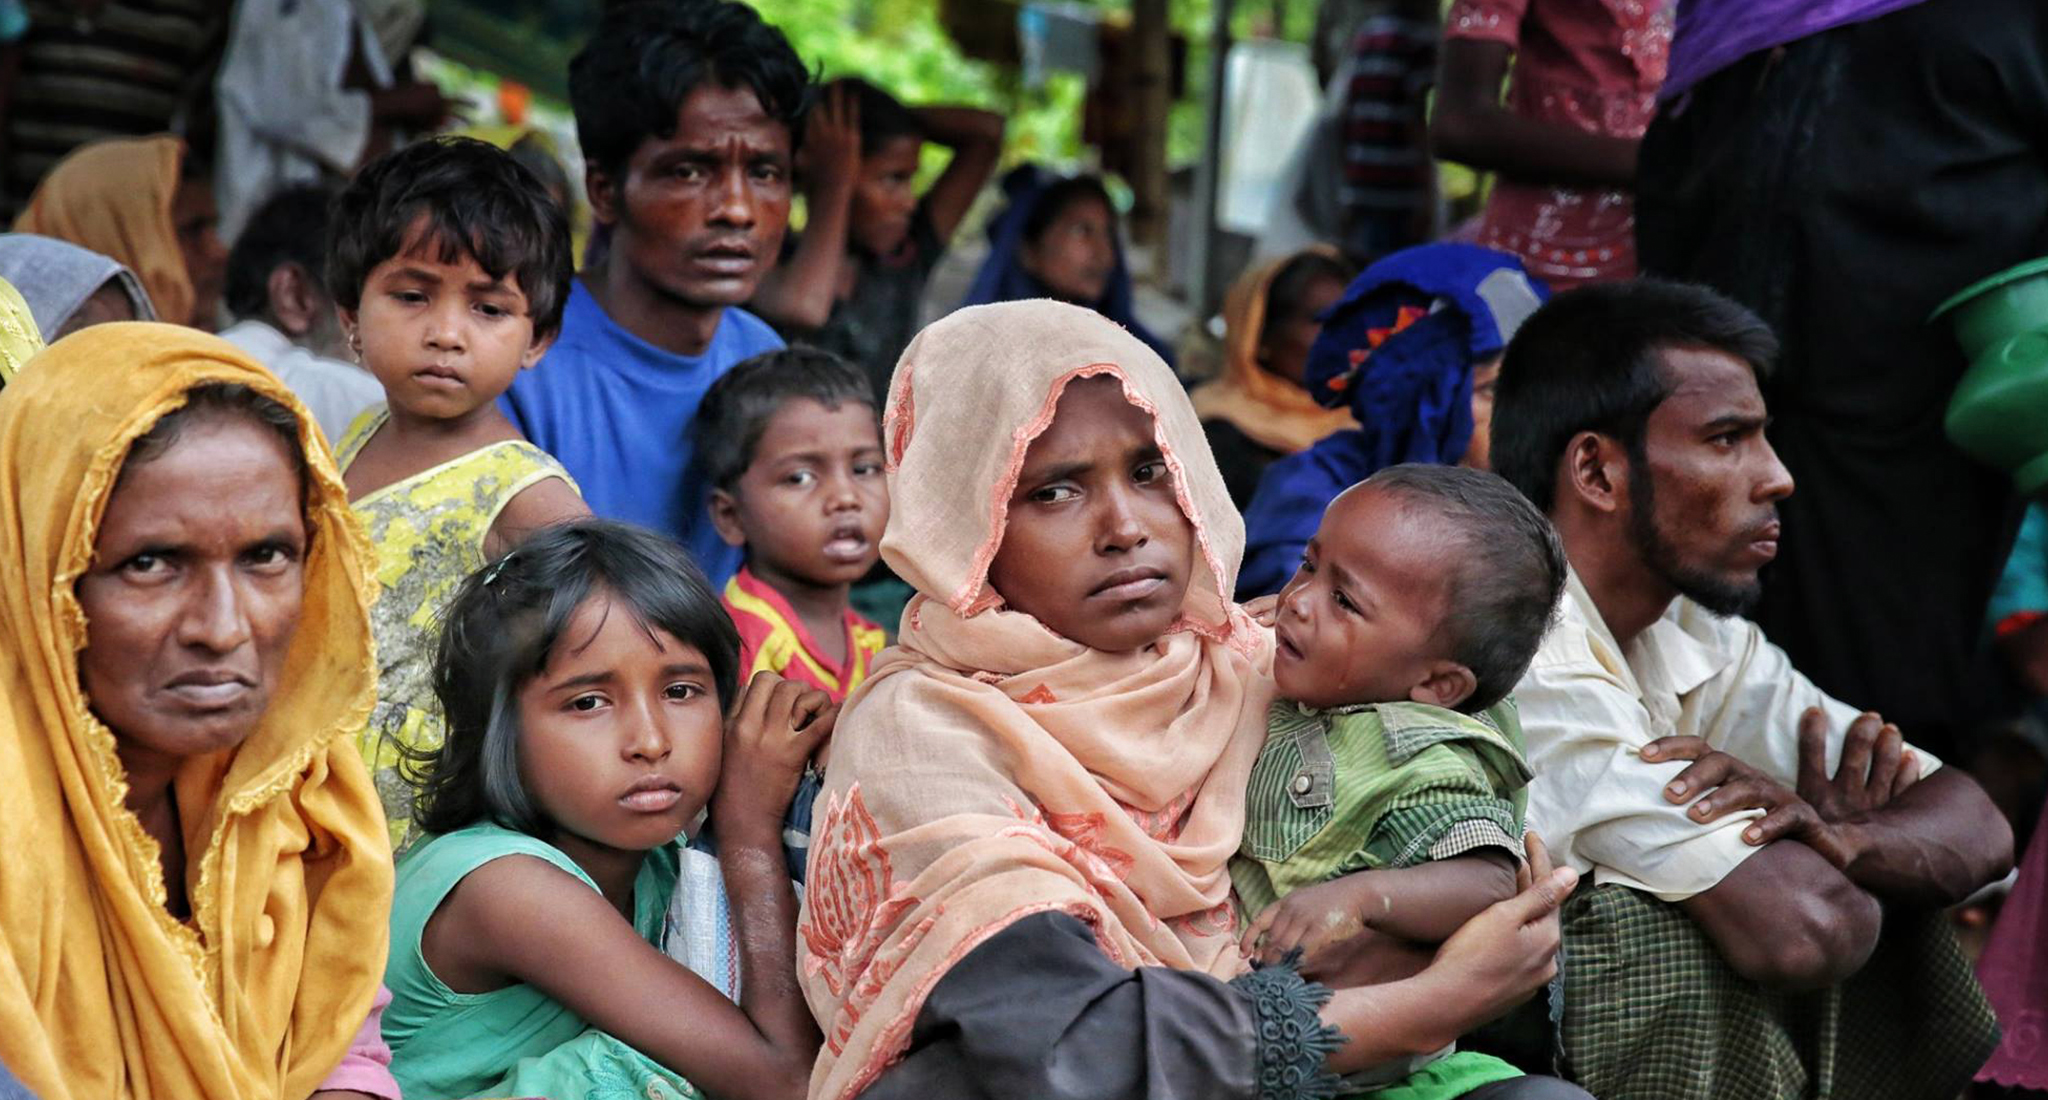 Photo of a group of Rohingya refugees sitting outside, who are part of a half a million Rohingya refugees flooded across the border to Bangladesh to escape violence in Burma’s Rakhine State, including the elderly, pregnant women and children.